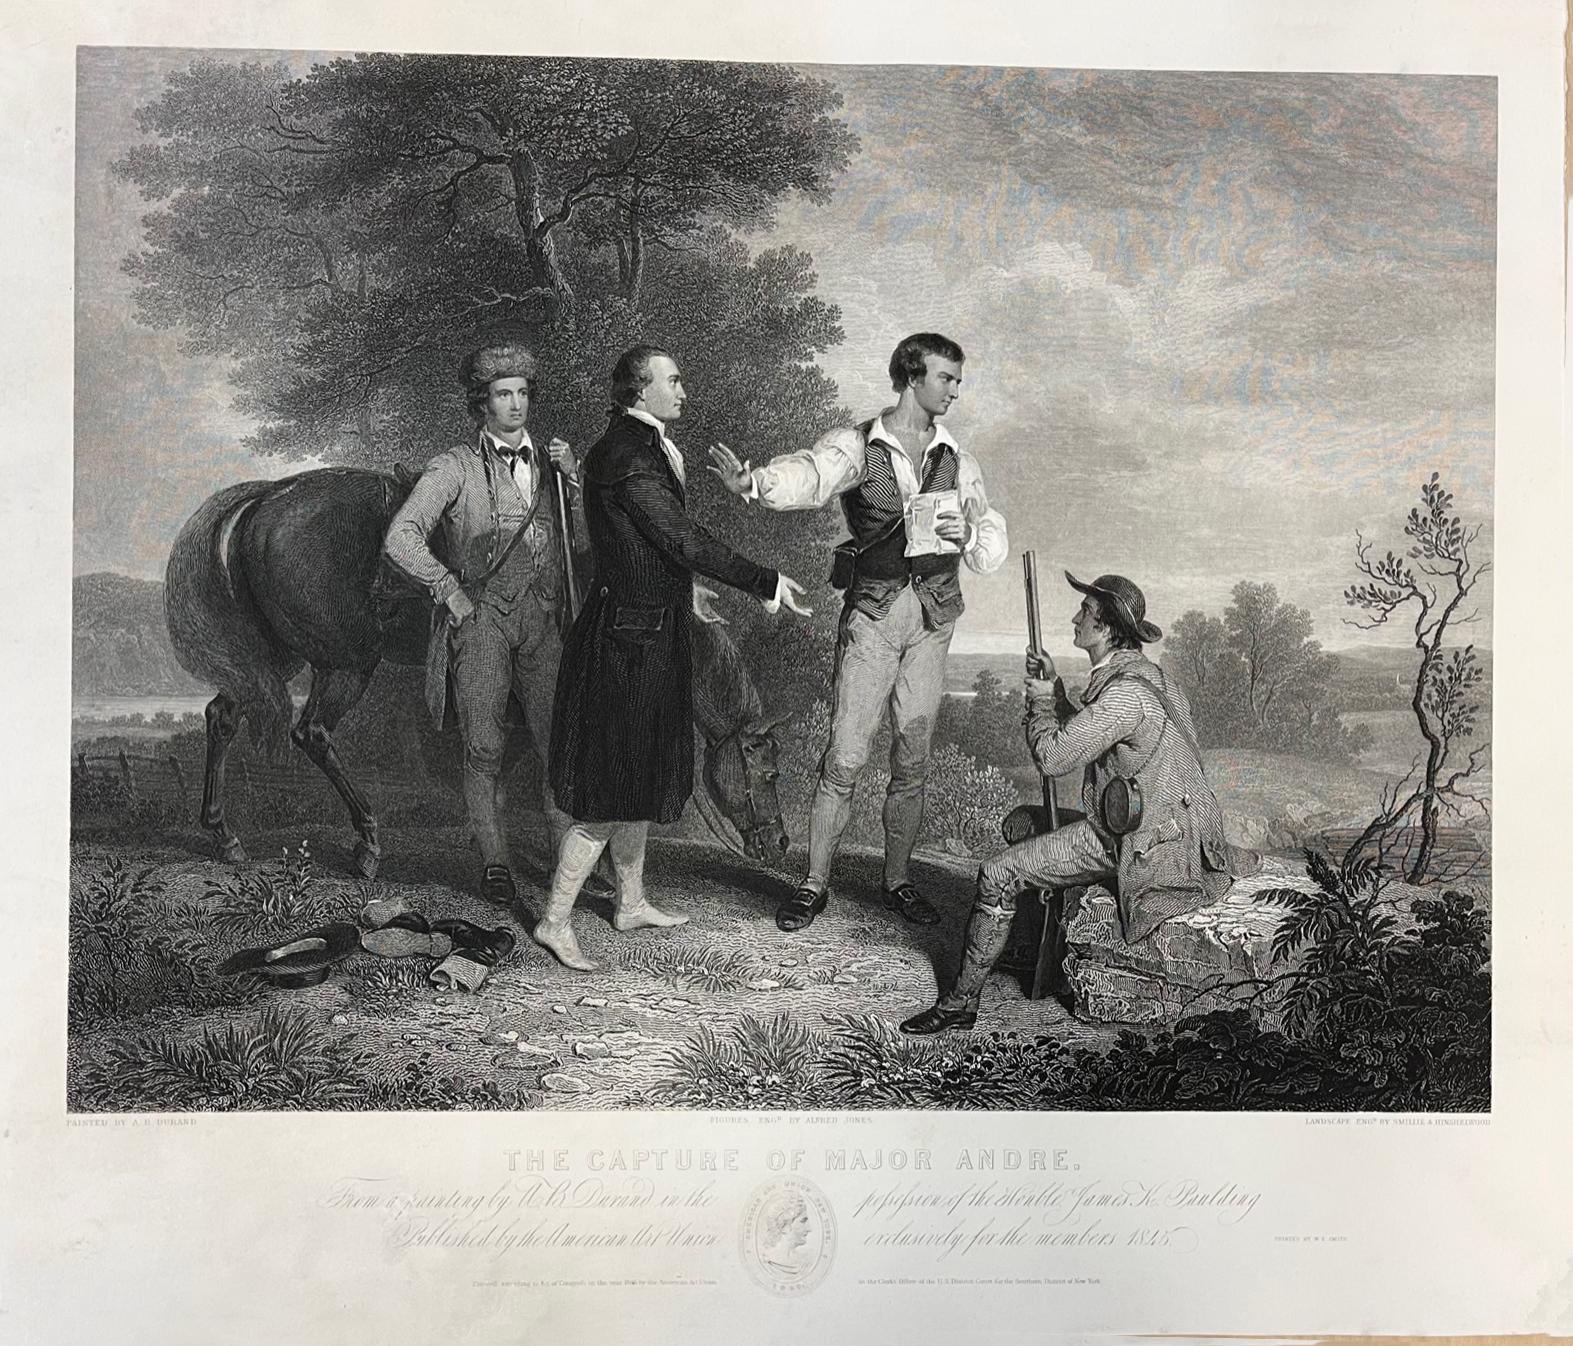 James Smillie Figurative Print - THE CAPTURE OF MAJOR ANDRE